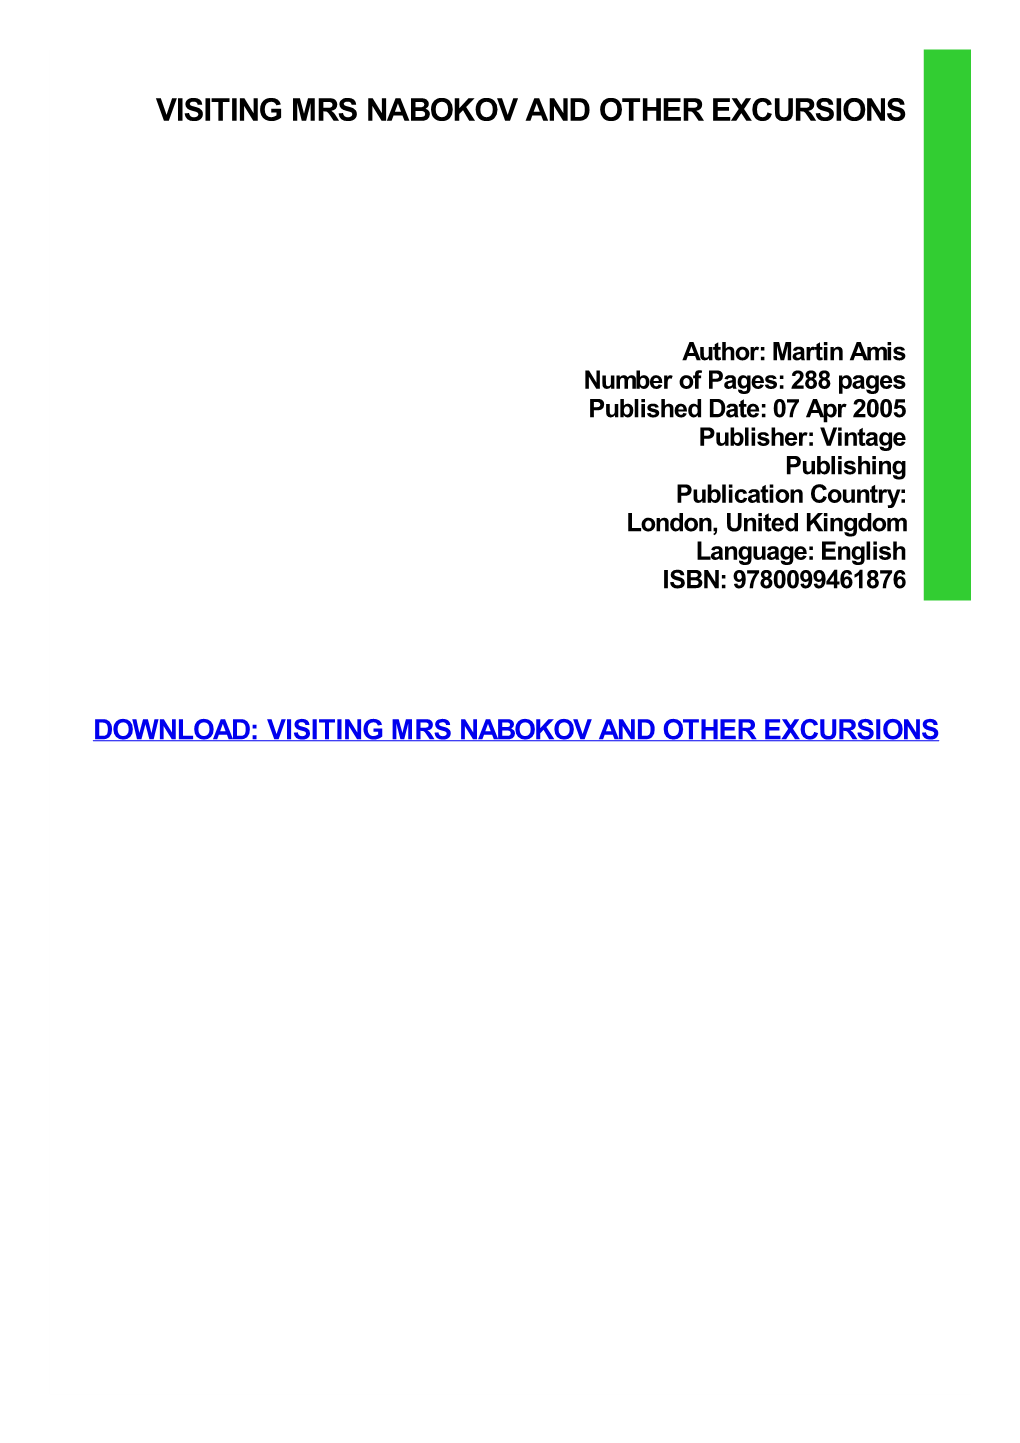 Visiting Mrs Nabokov and Other Excursions Ebook, Epub